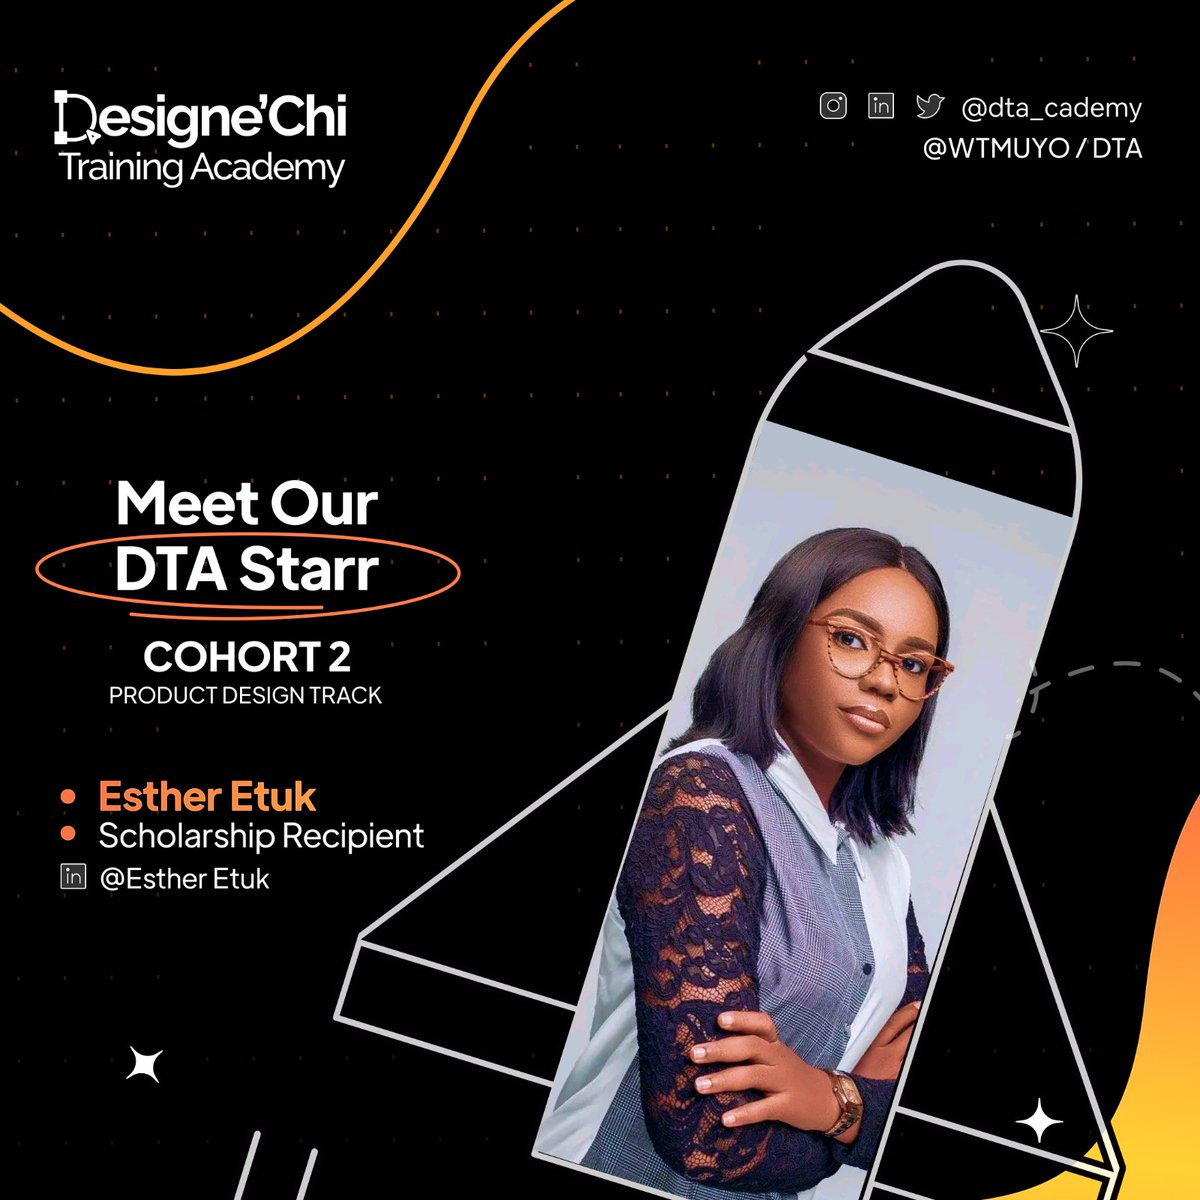 Hy guys 👋
Behold your DTA Starr ✨ 

Please help me win this competition by simply liking, and commenting 🙏
@DTA_cademy @WomenTechmakers  
@figma 

#learninguiux #DTA #WTMUYO